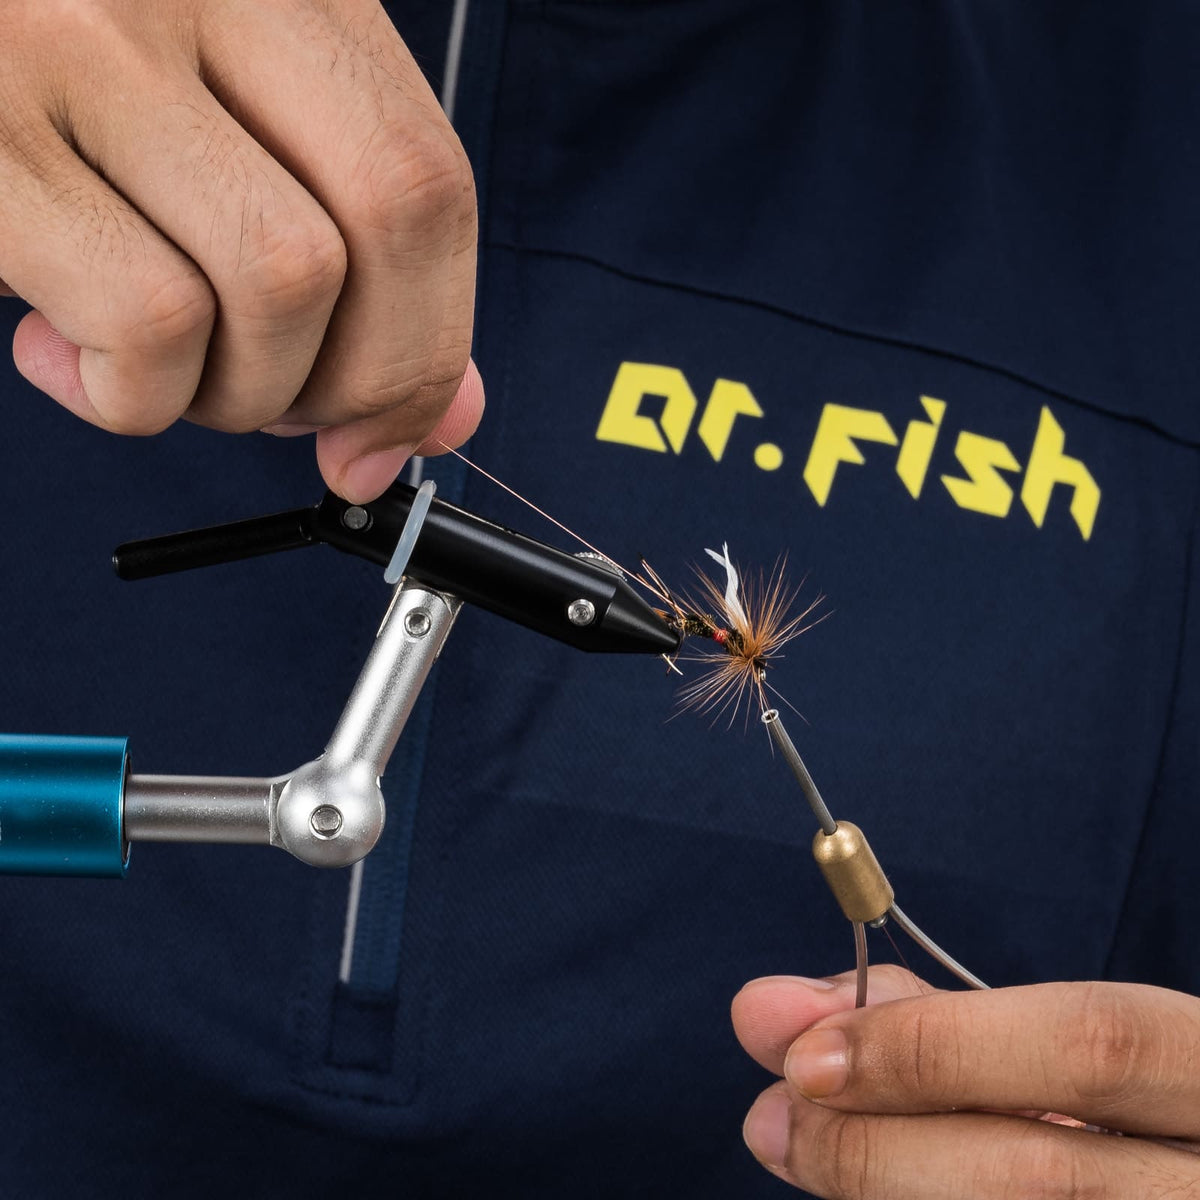 A Beginners Guide to Fly Tying Tools: How to Use Dr.Fish Whip Finisher, Dubbing Twister, Hackle Pliers Clamps